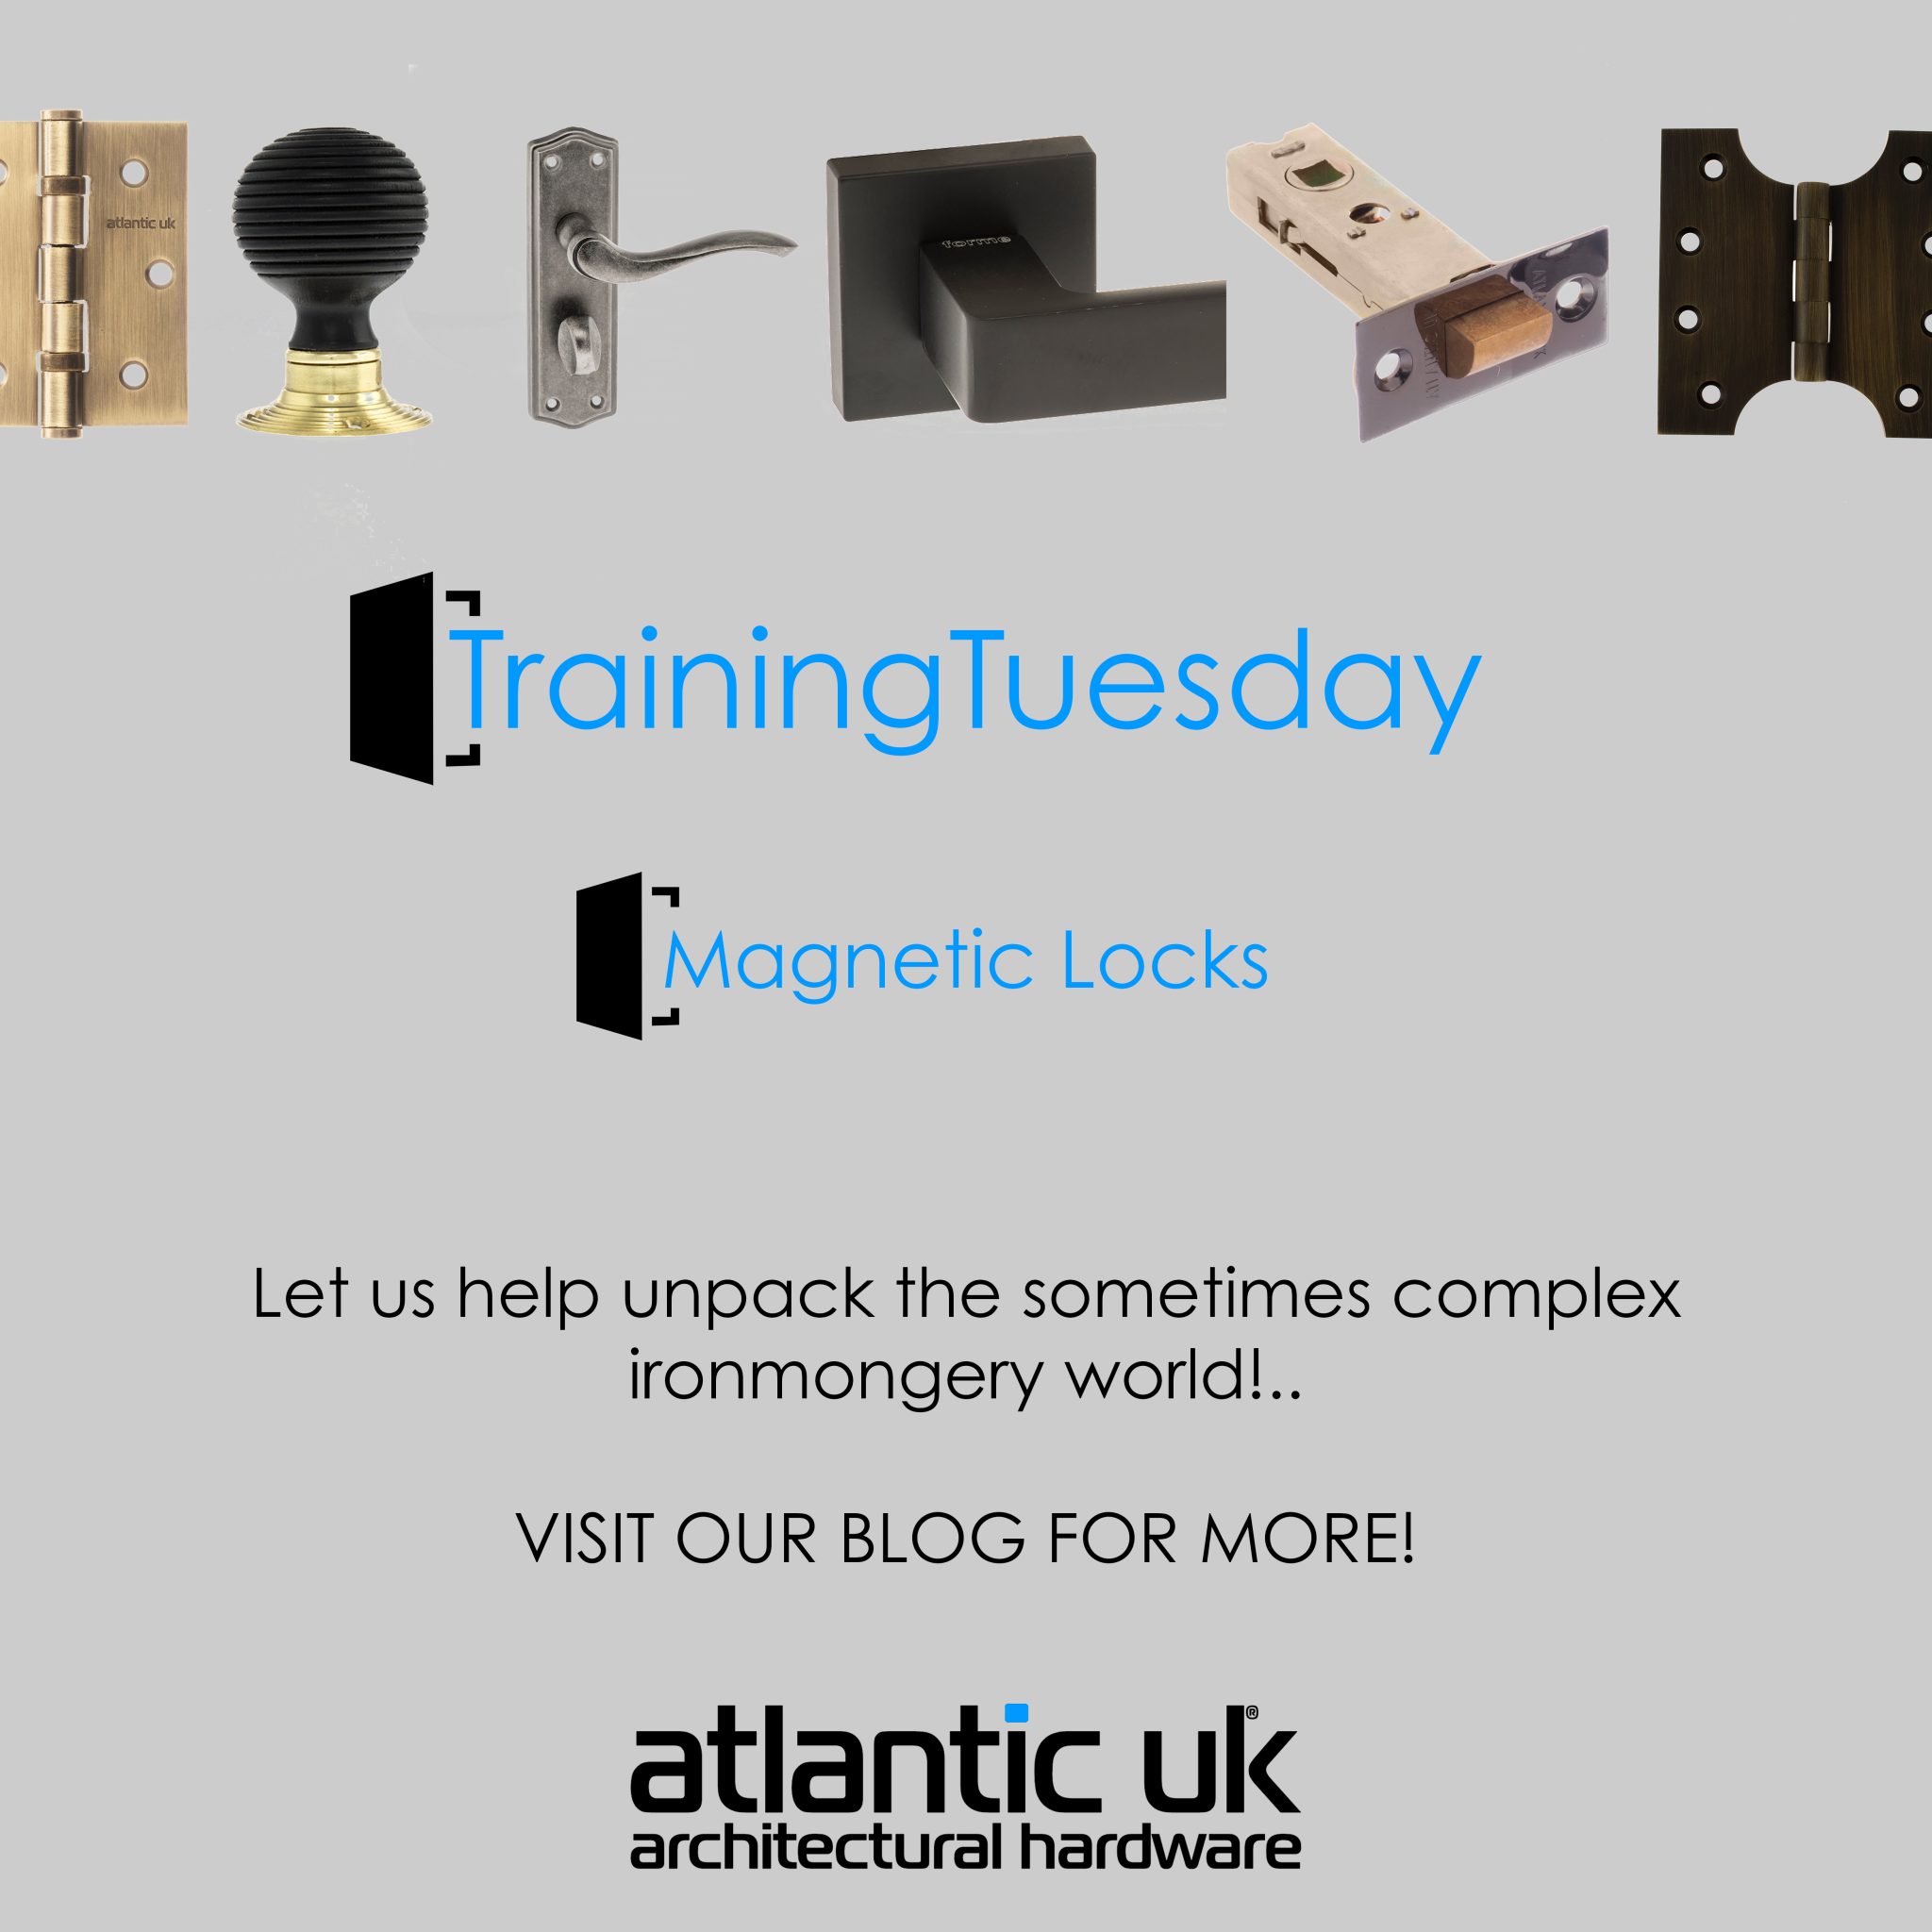 What is a Magnetic Lock?